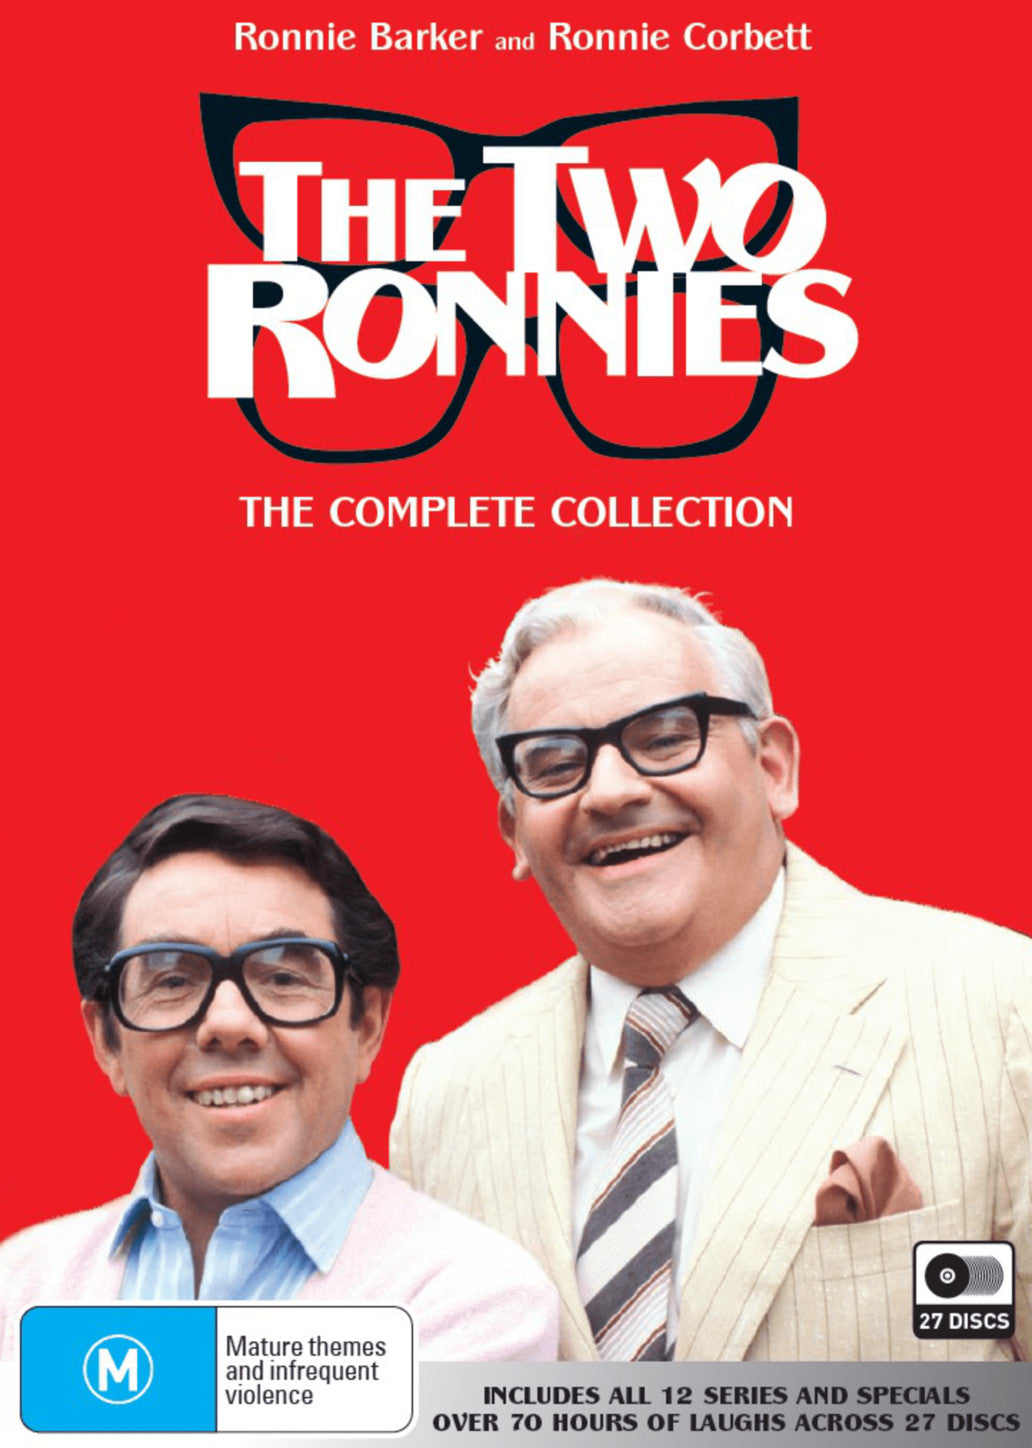 THE TWO RONNIES – THE COMPLETE COLLECTION